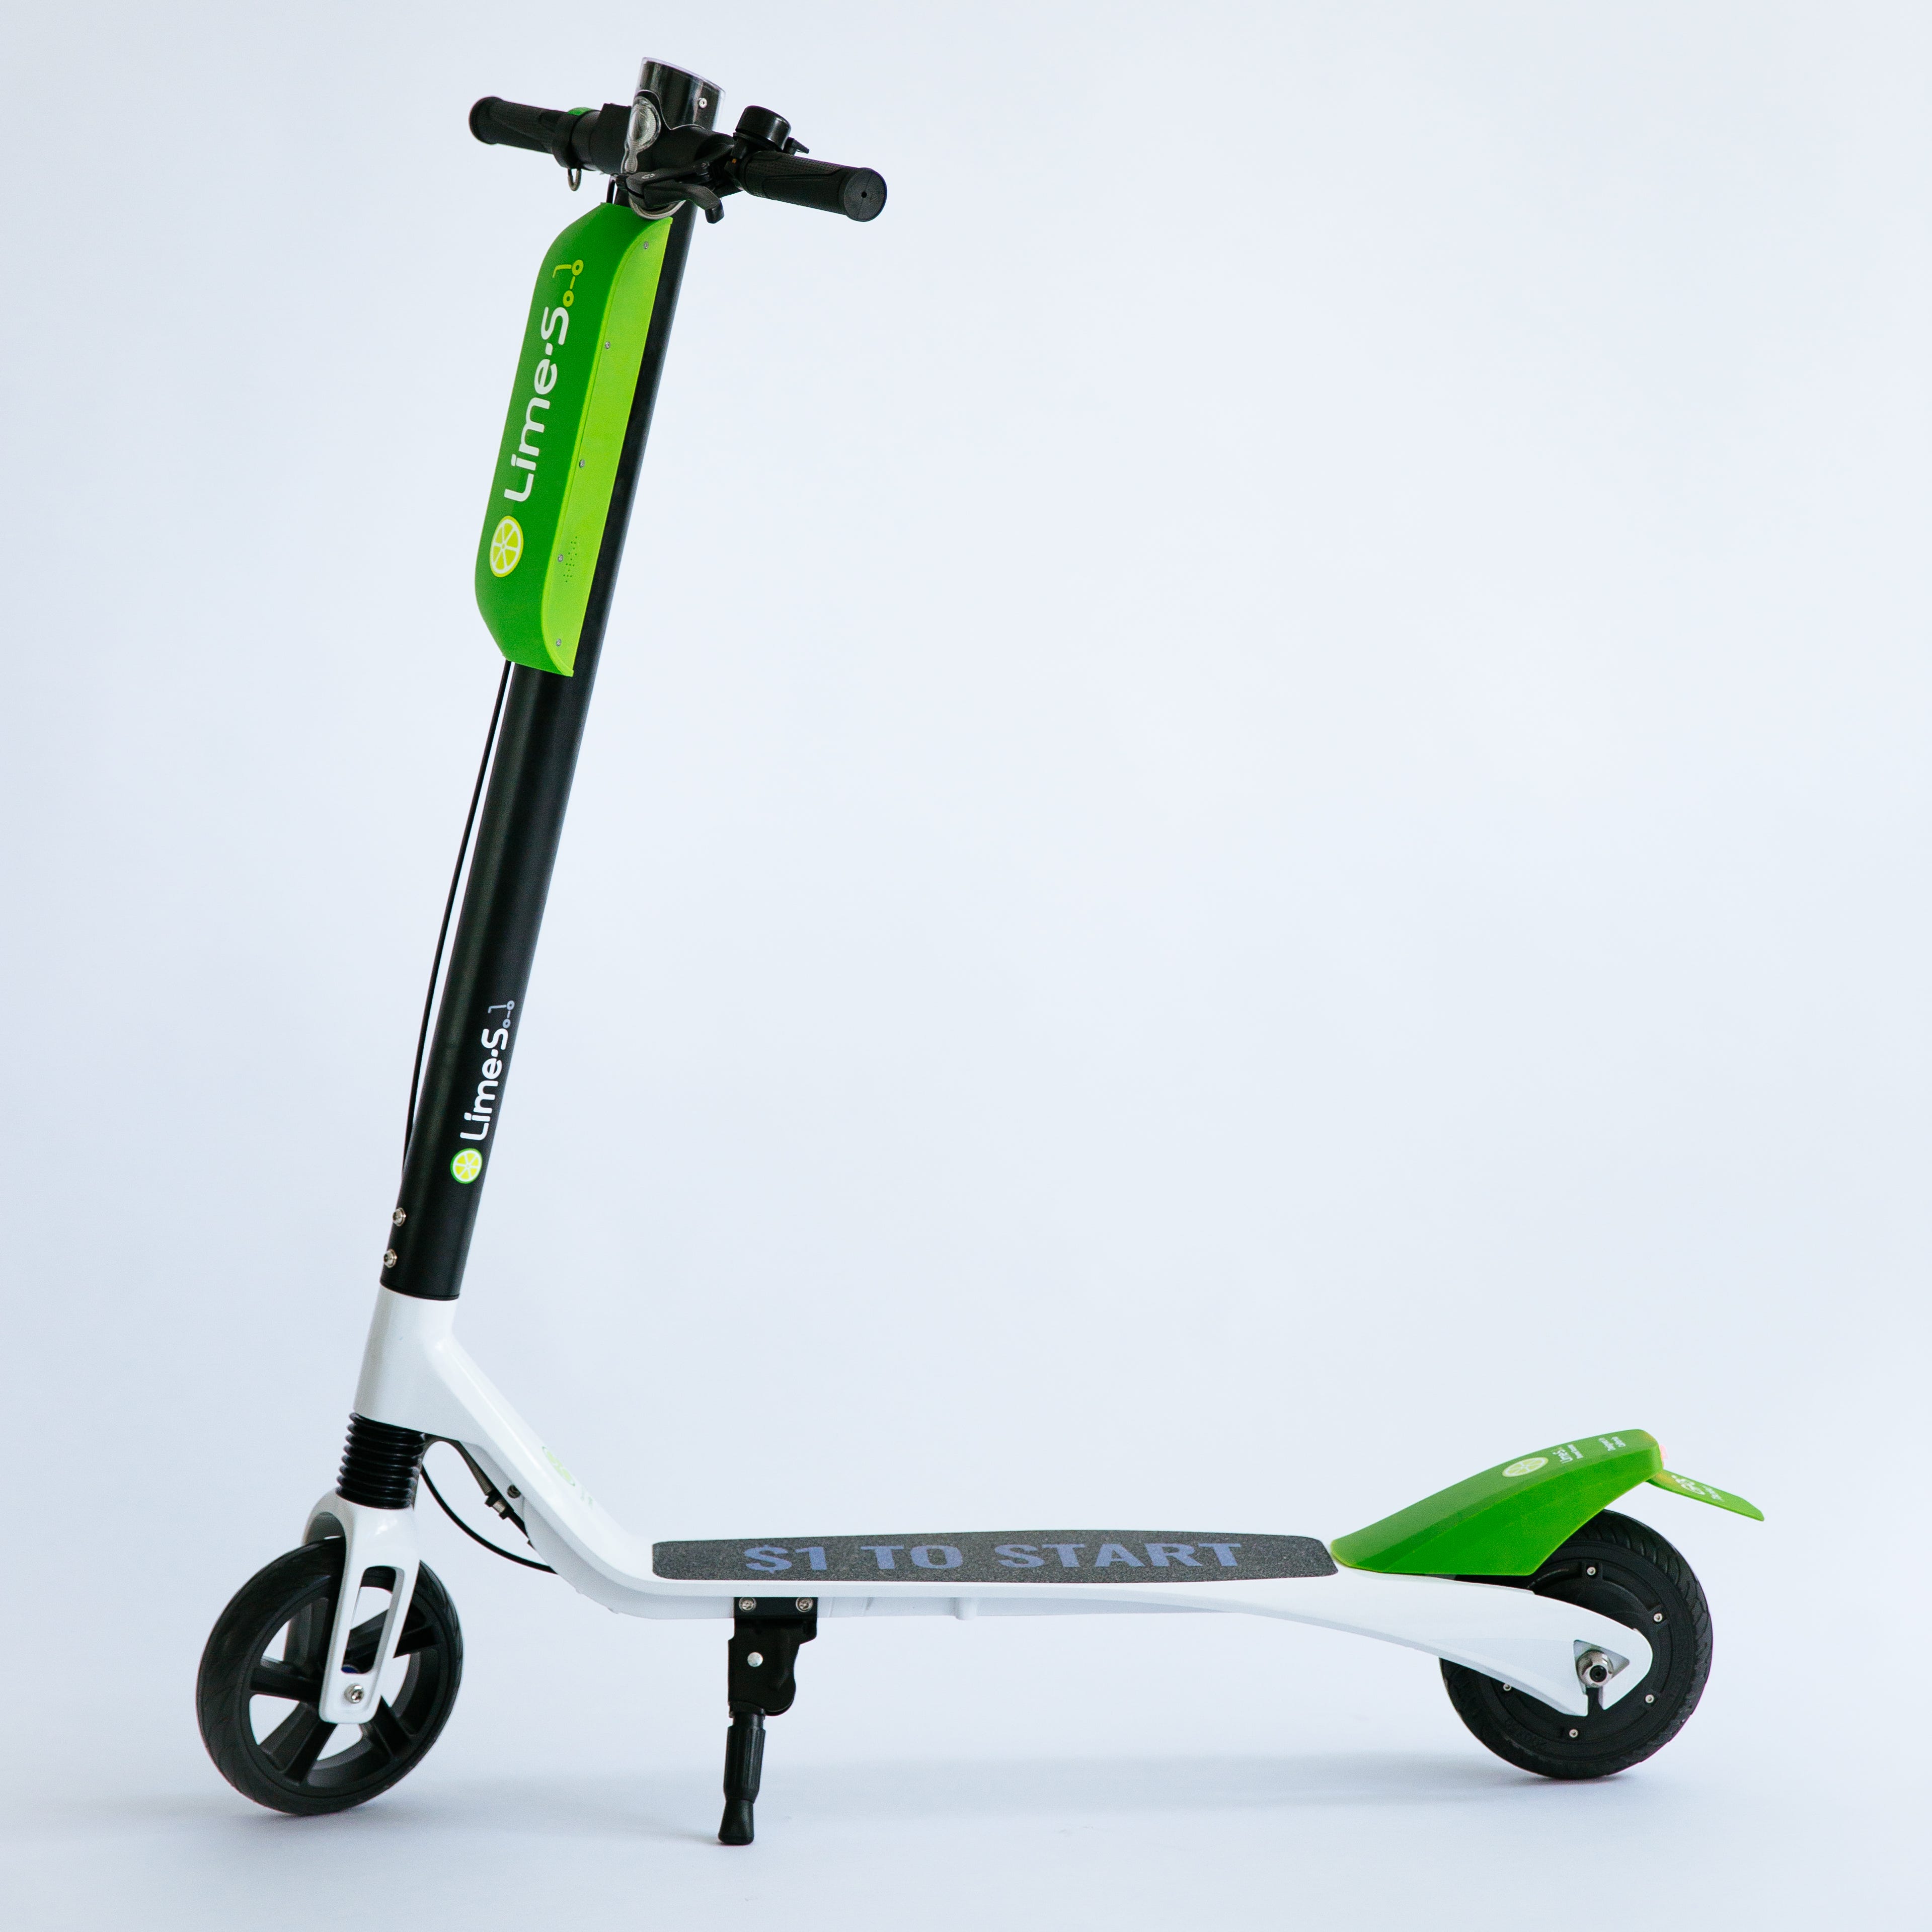 Tempe is getting a new electric scooter option.